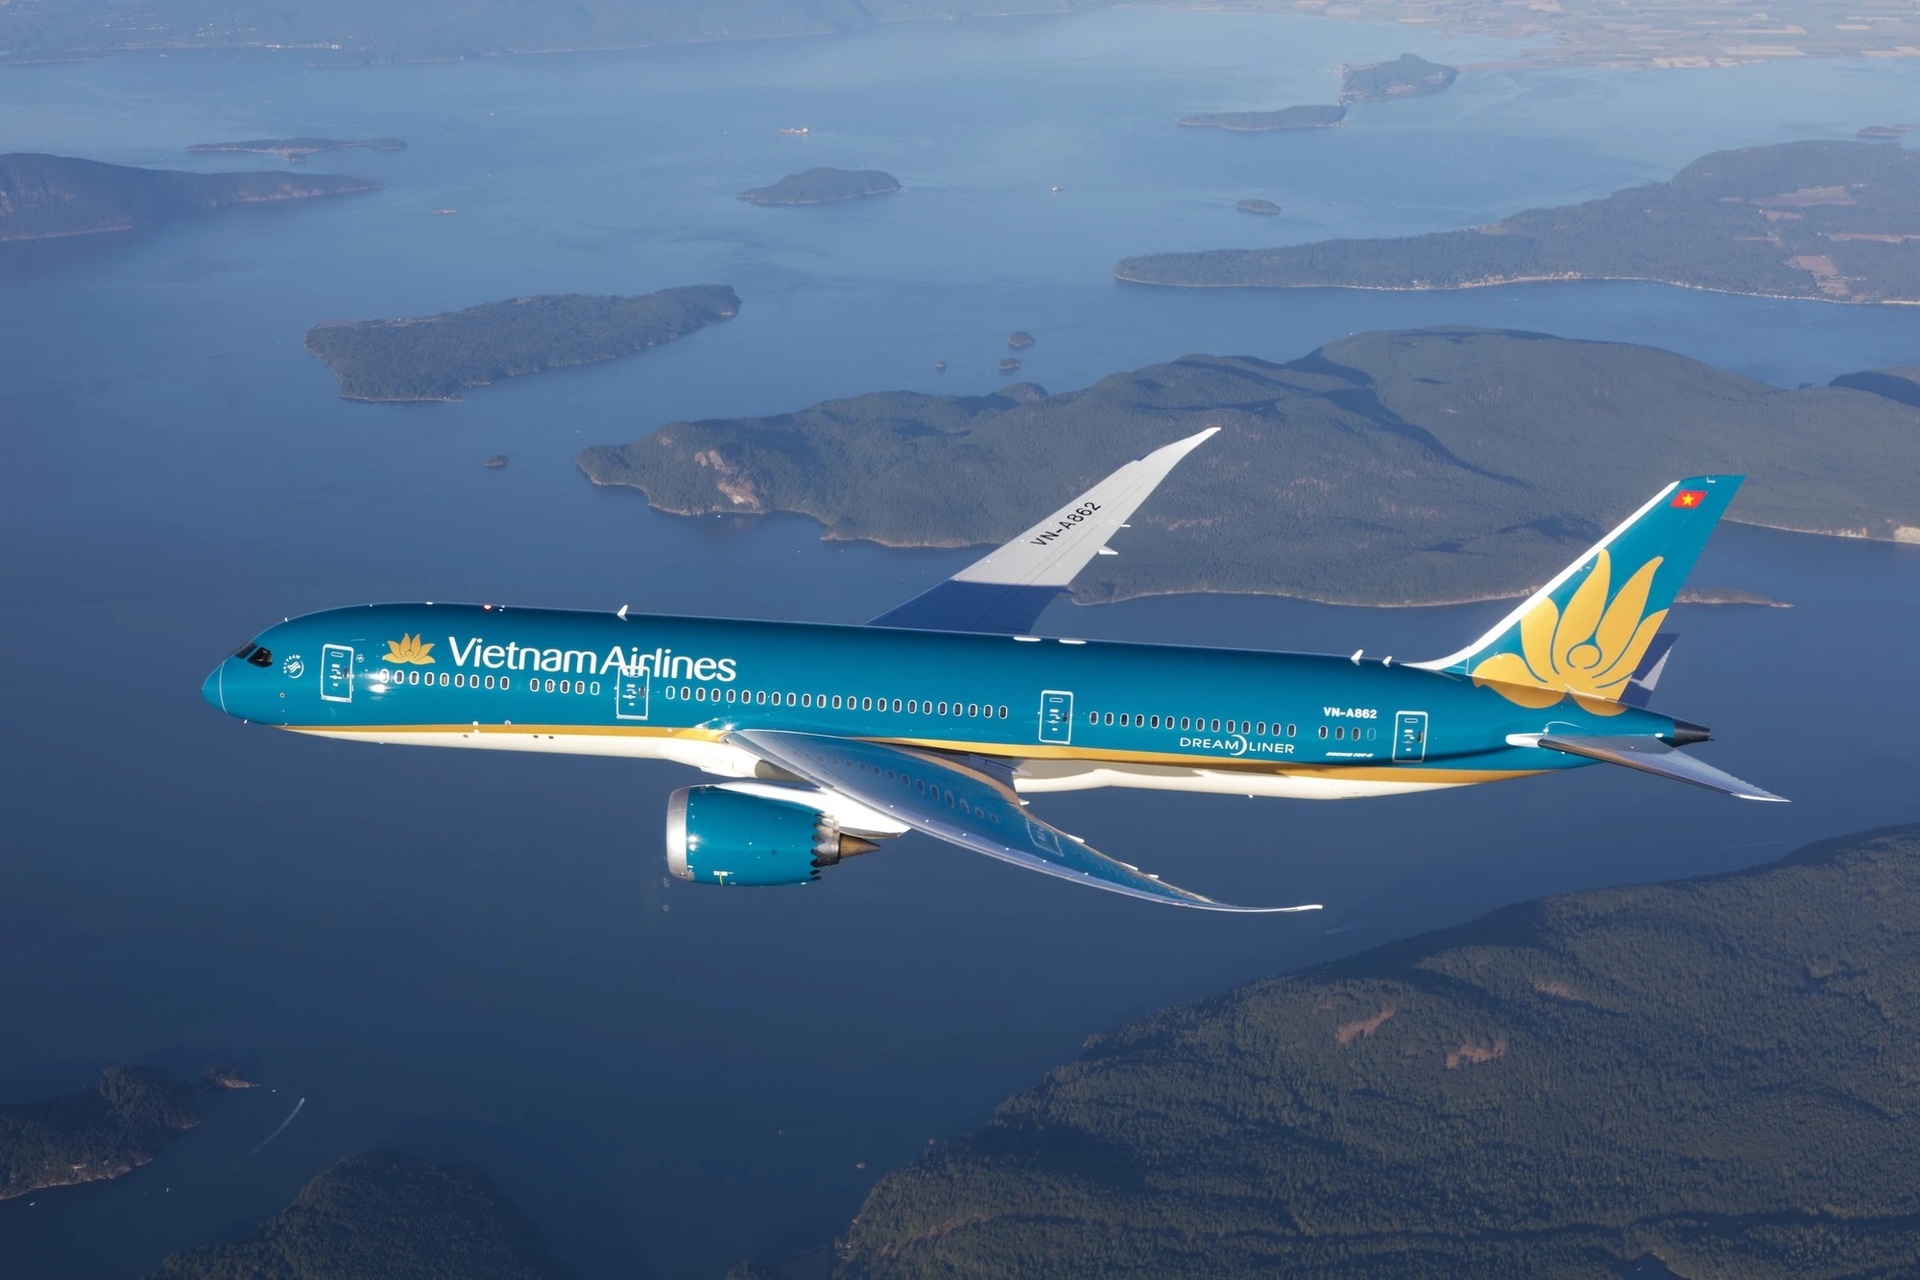  A Boeing 787 operated by Vietnam Airlines. Photo courtesy of the company.